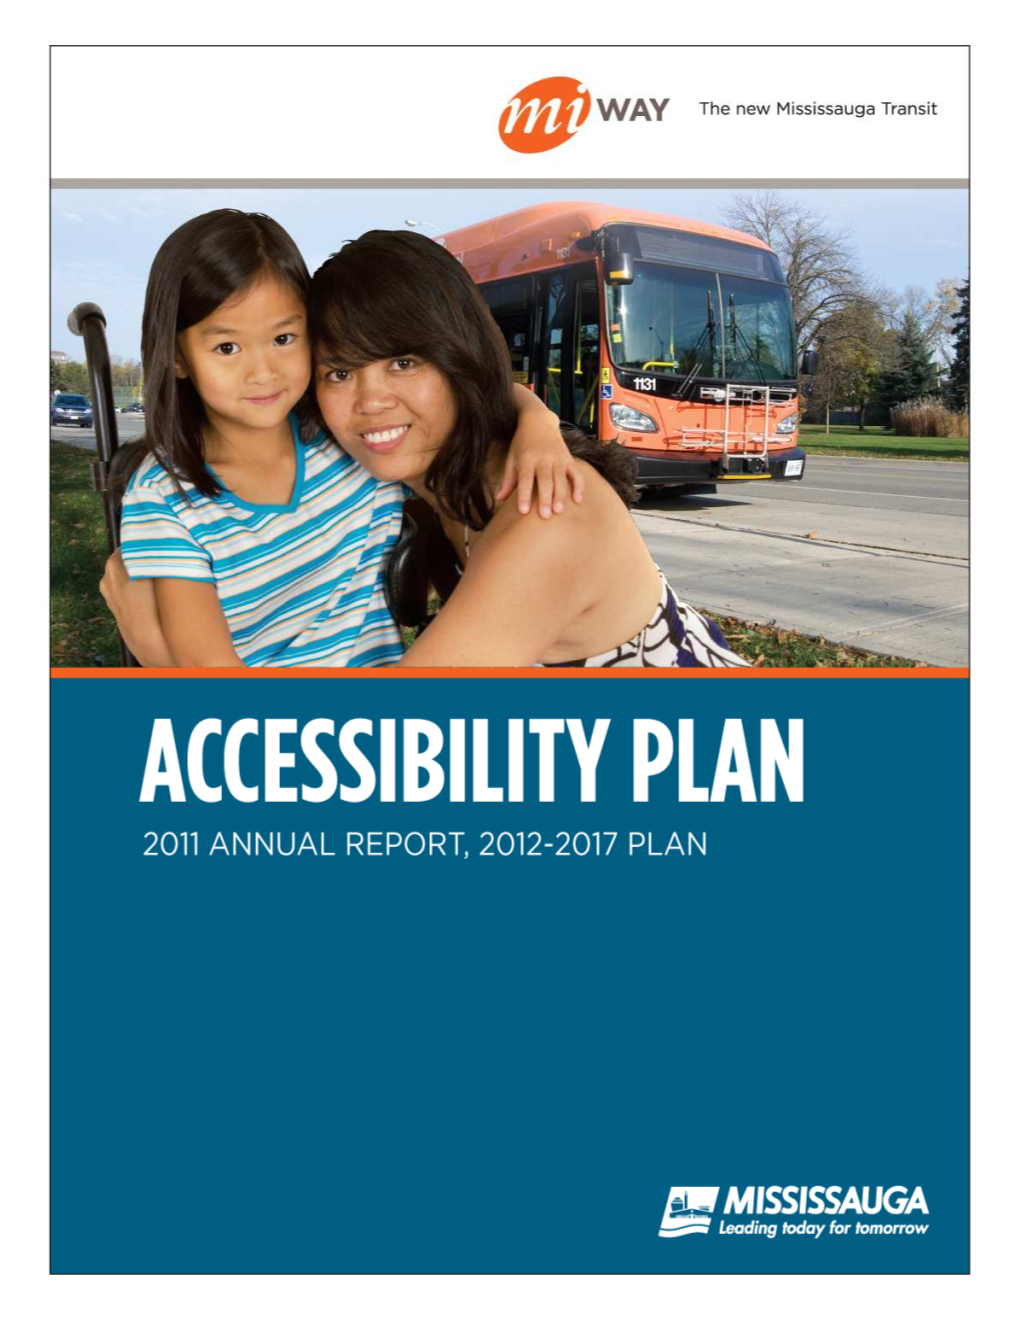 Accessibility Plan: 2011 Annual Report